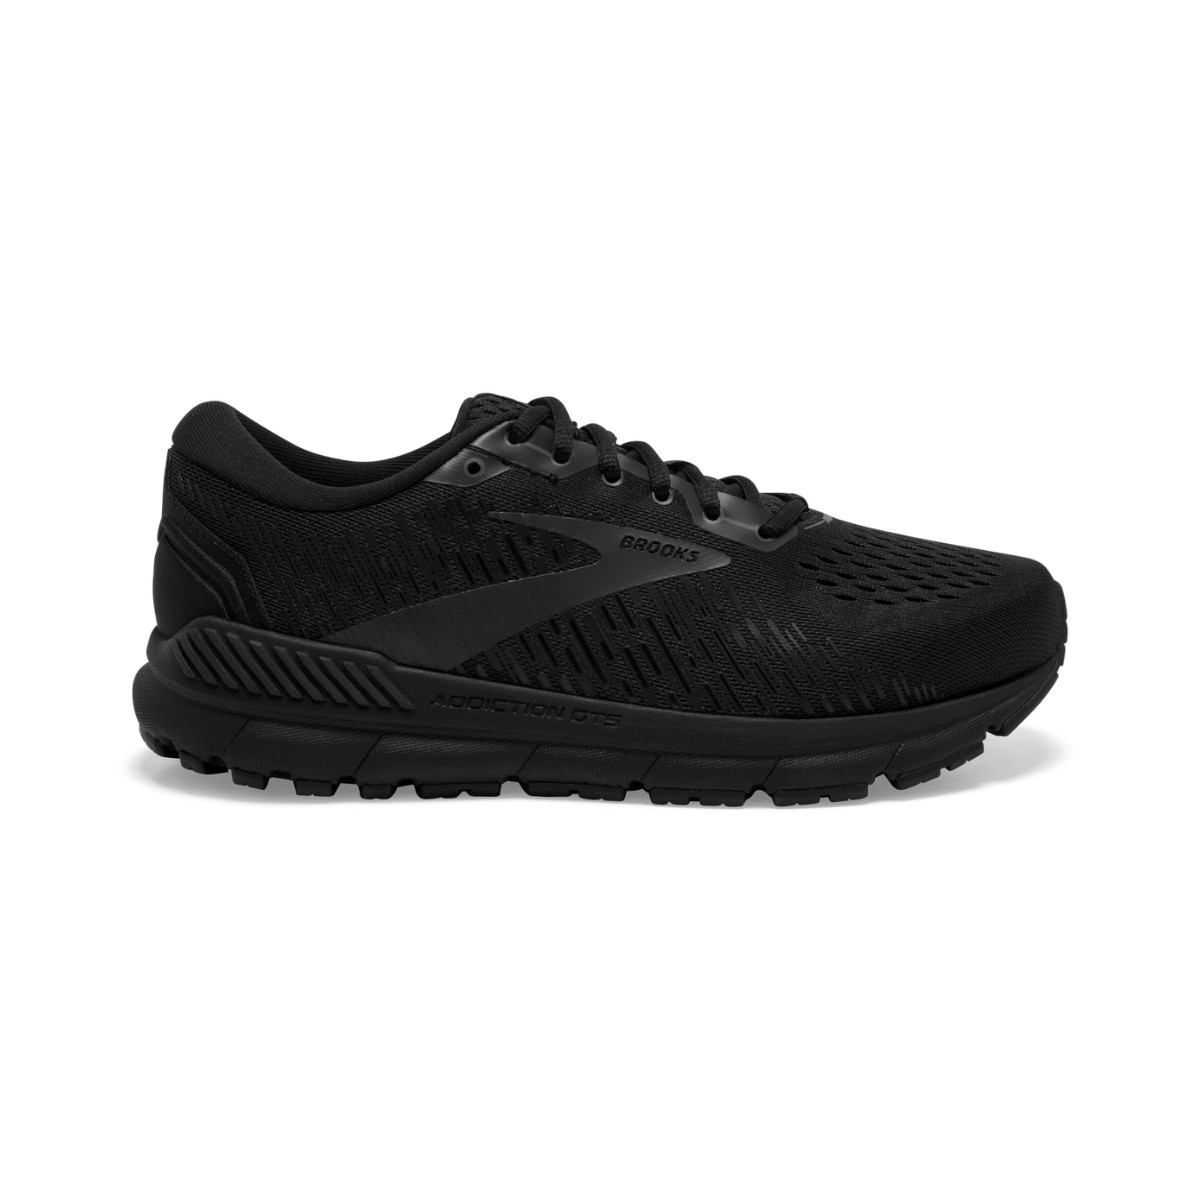 Chaussures Brooks Addiction GTS 15 Noir SS22, Taille 42 - EUR